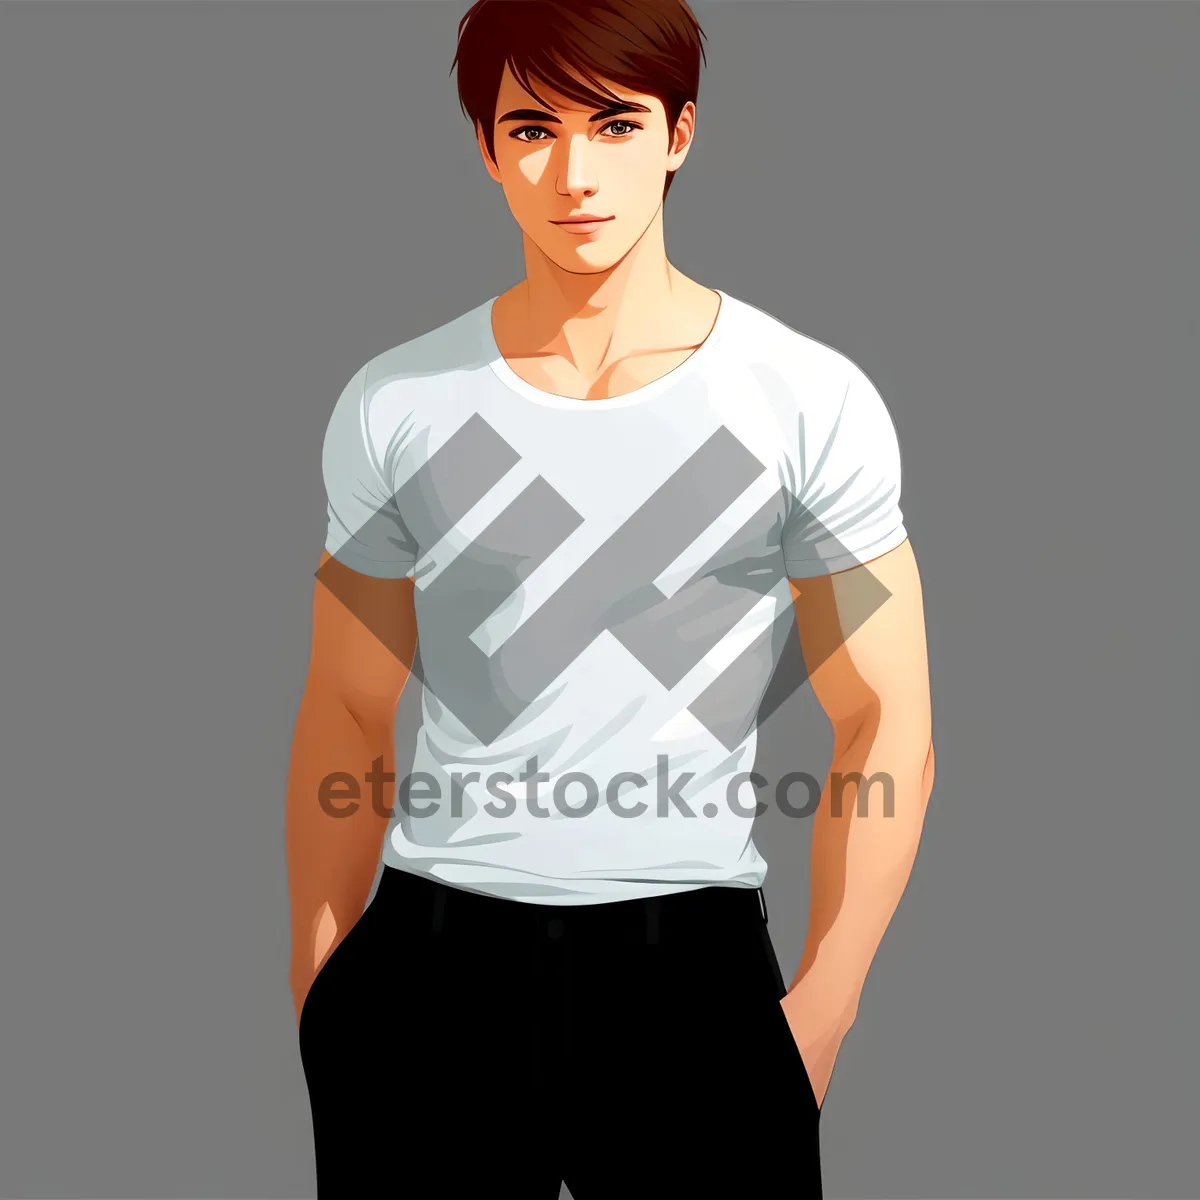 Picture of Smiling Male Model in Casual Shirt